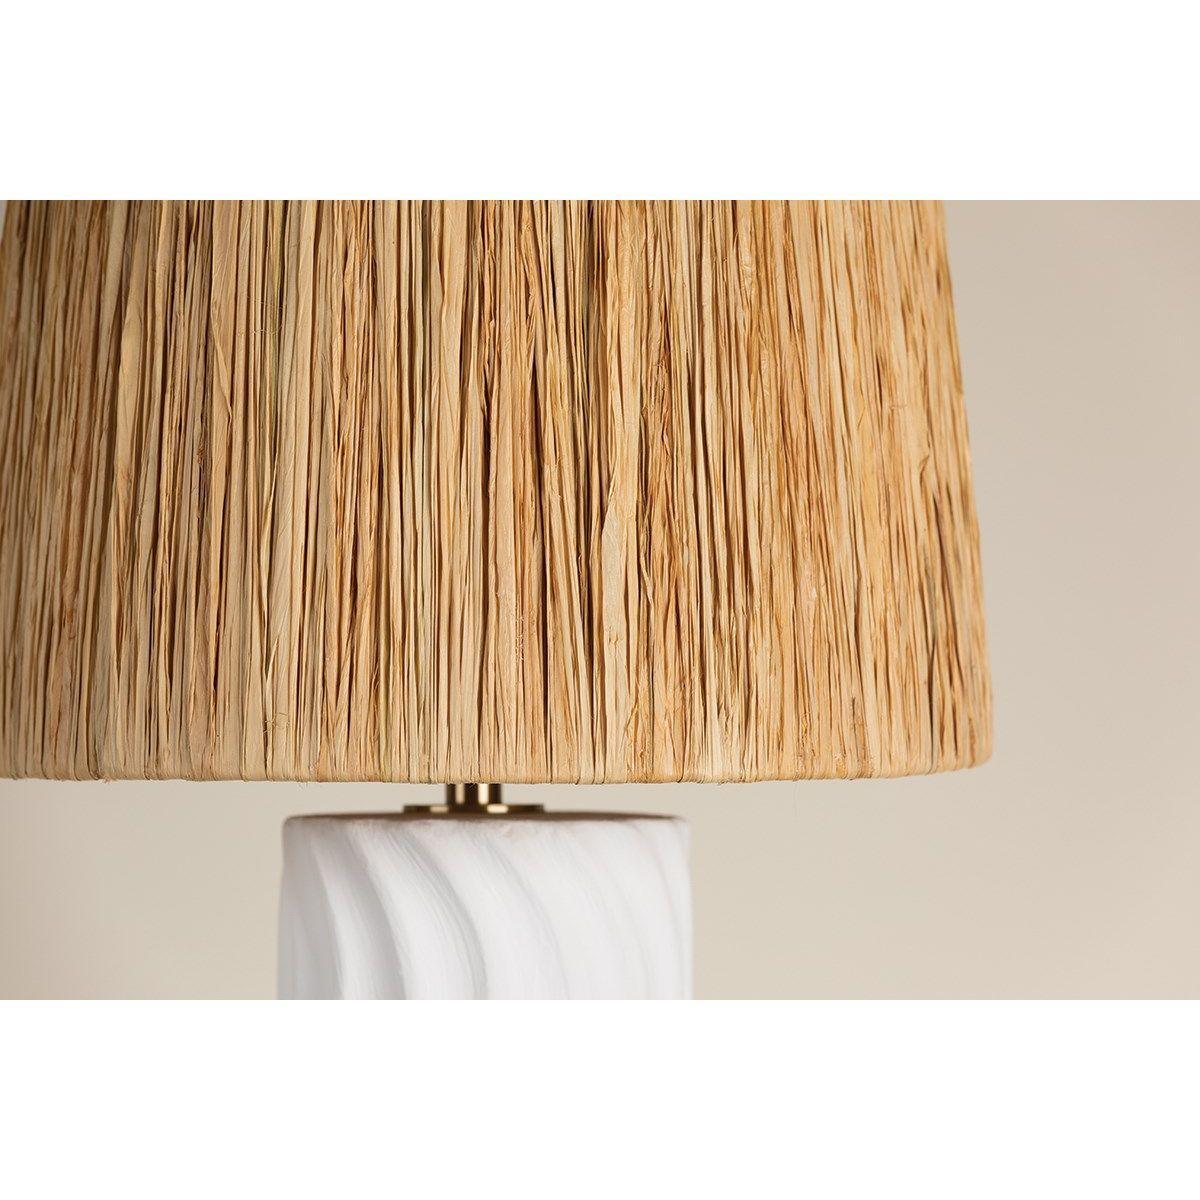 Daniella Table Lamp Ceramic White Wash with Aged Brass Accents